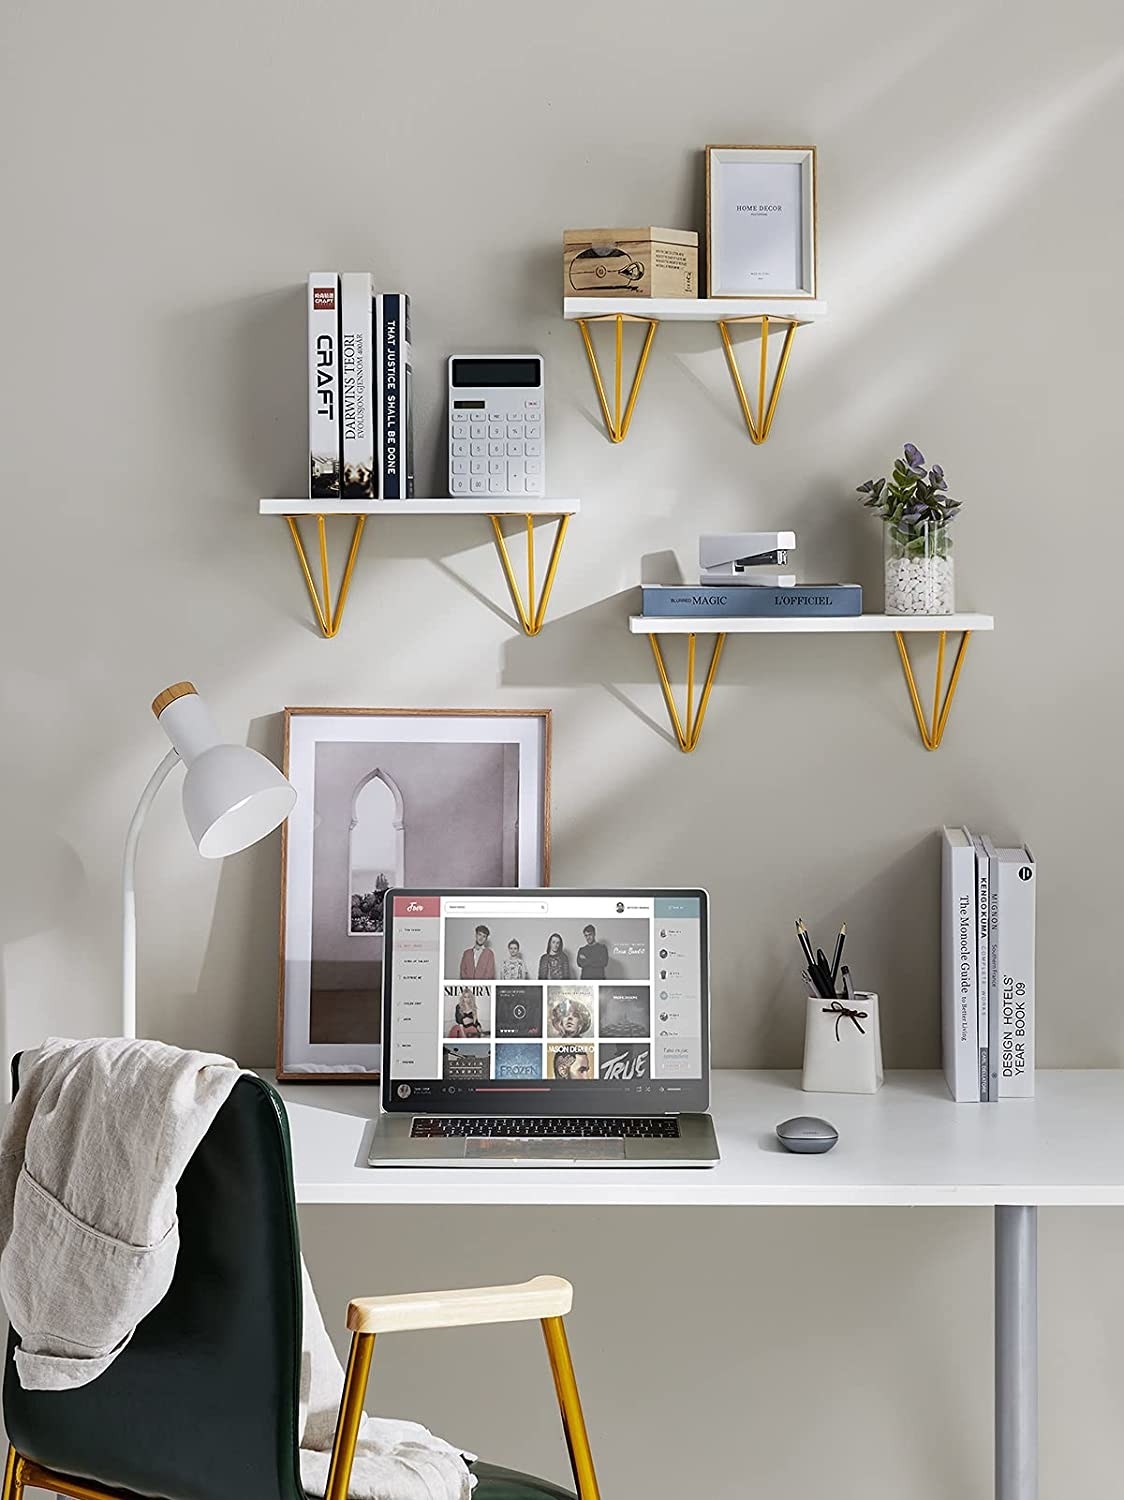 Three shelves with decor and knickknacks on them above a desk